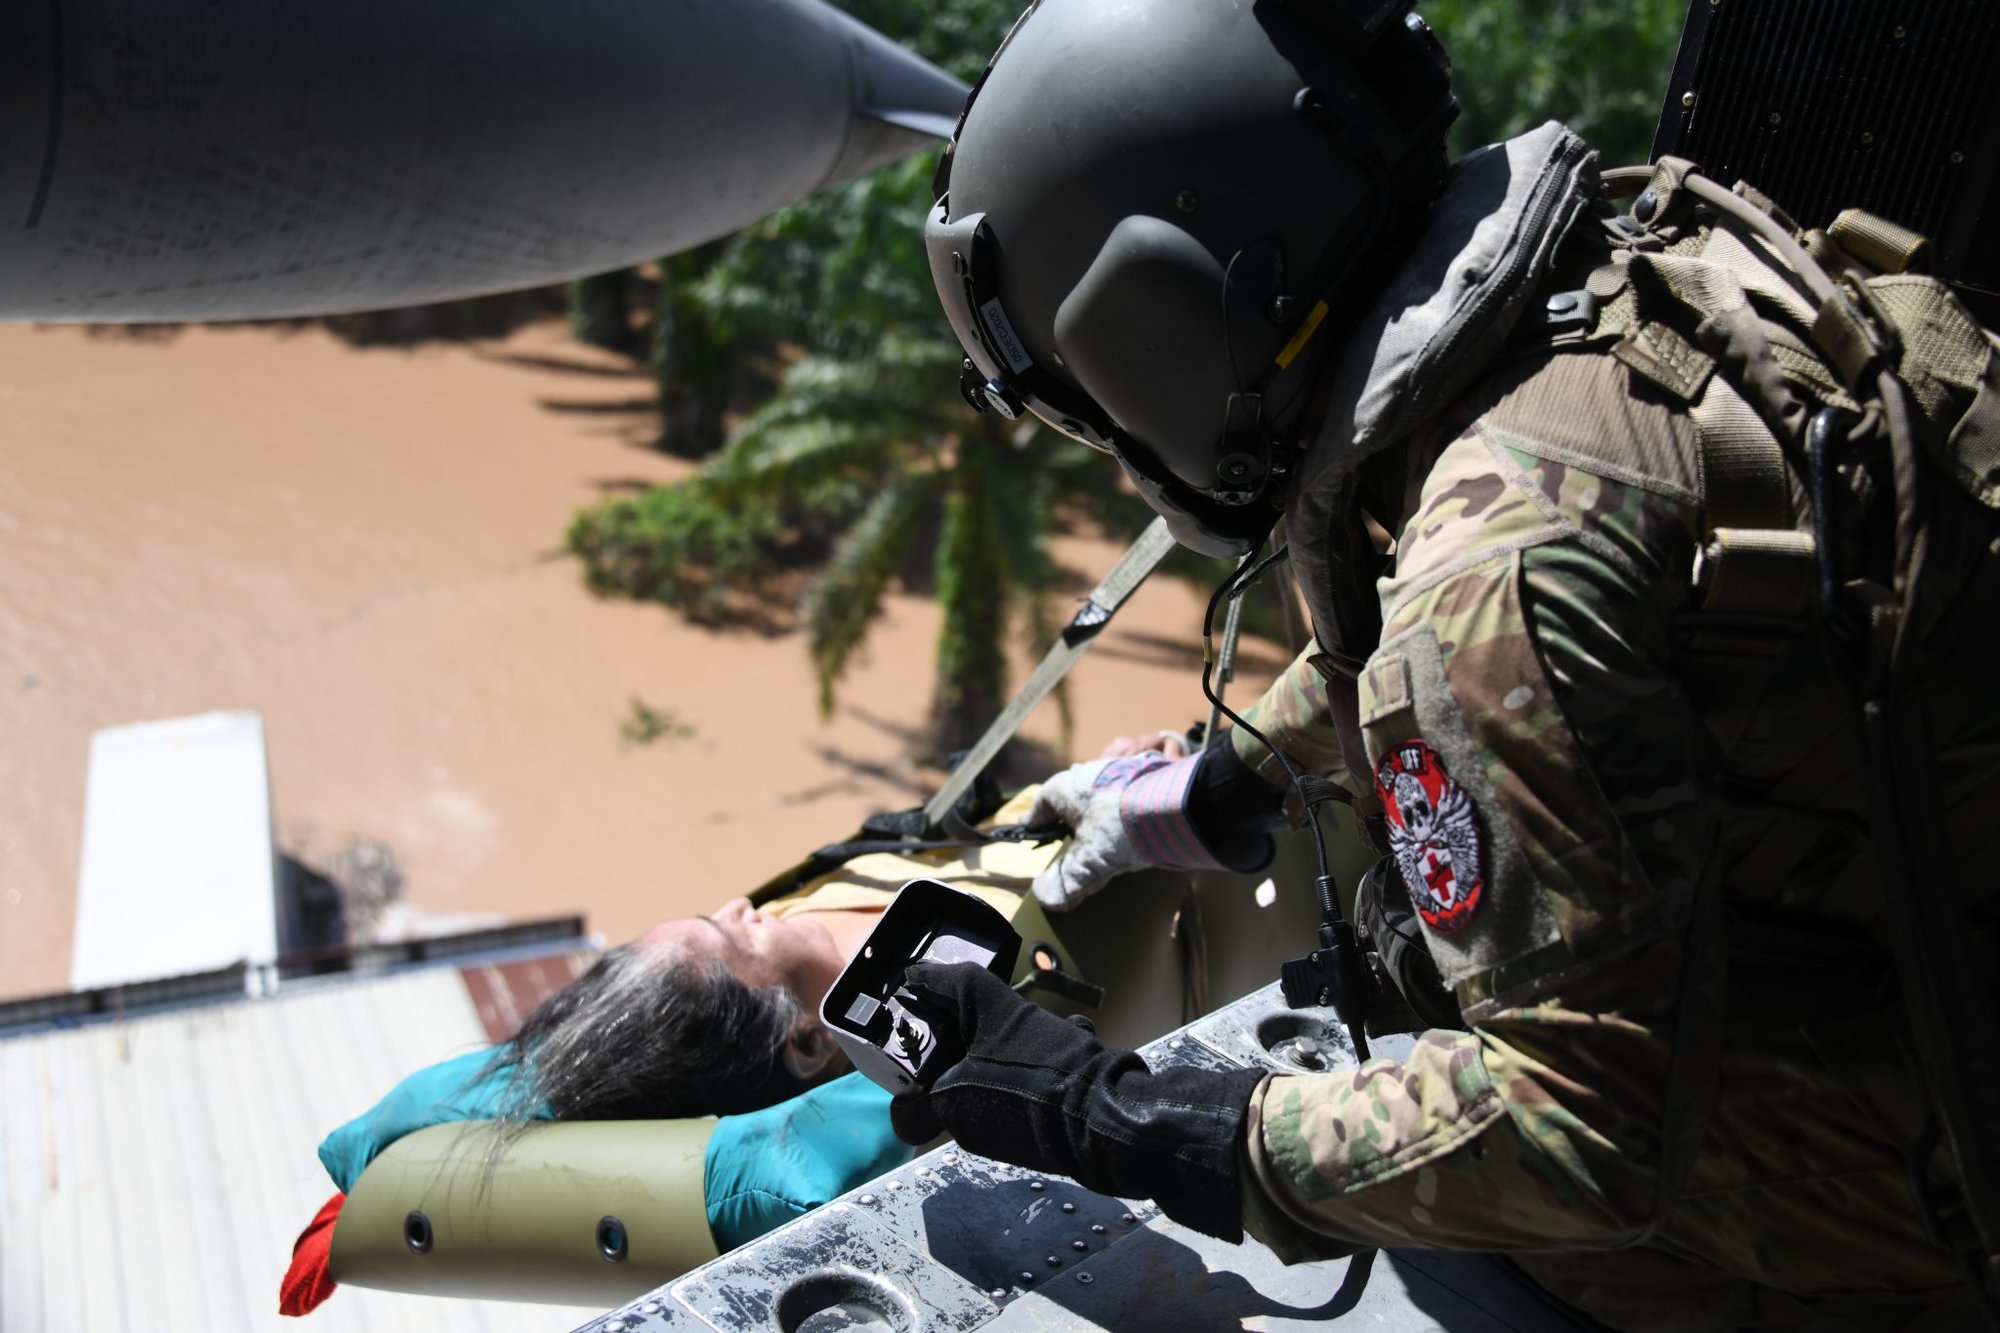 A U.S. Army HH-60 Black Hawk helicopter crew member assigned to the 1-228th Aviation Regiment, Joint Task Force-Bravo hoists a Honduran woman in a gurney above the floodwaters of Hurricane Eta at San Pedro Sula, Honduras, Nov. 7, 2020. JTF-Bravo’s 1-228th Aviation Regiment provided aviation support while also conducting medical evacuation operations to rescue stranded survivors. (U.S. Air Force photo by Staff Sgt. Elijaih Tiggs)